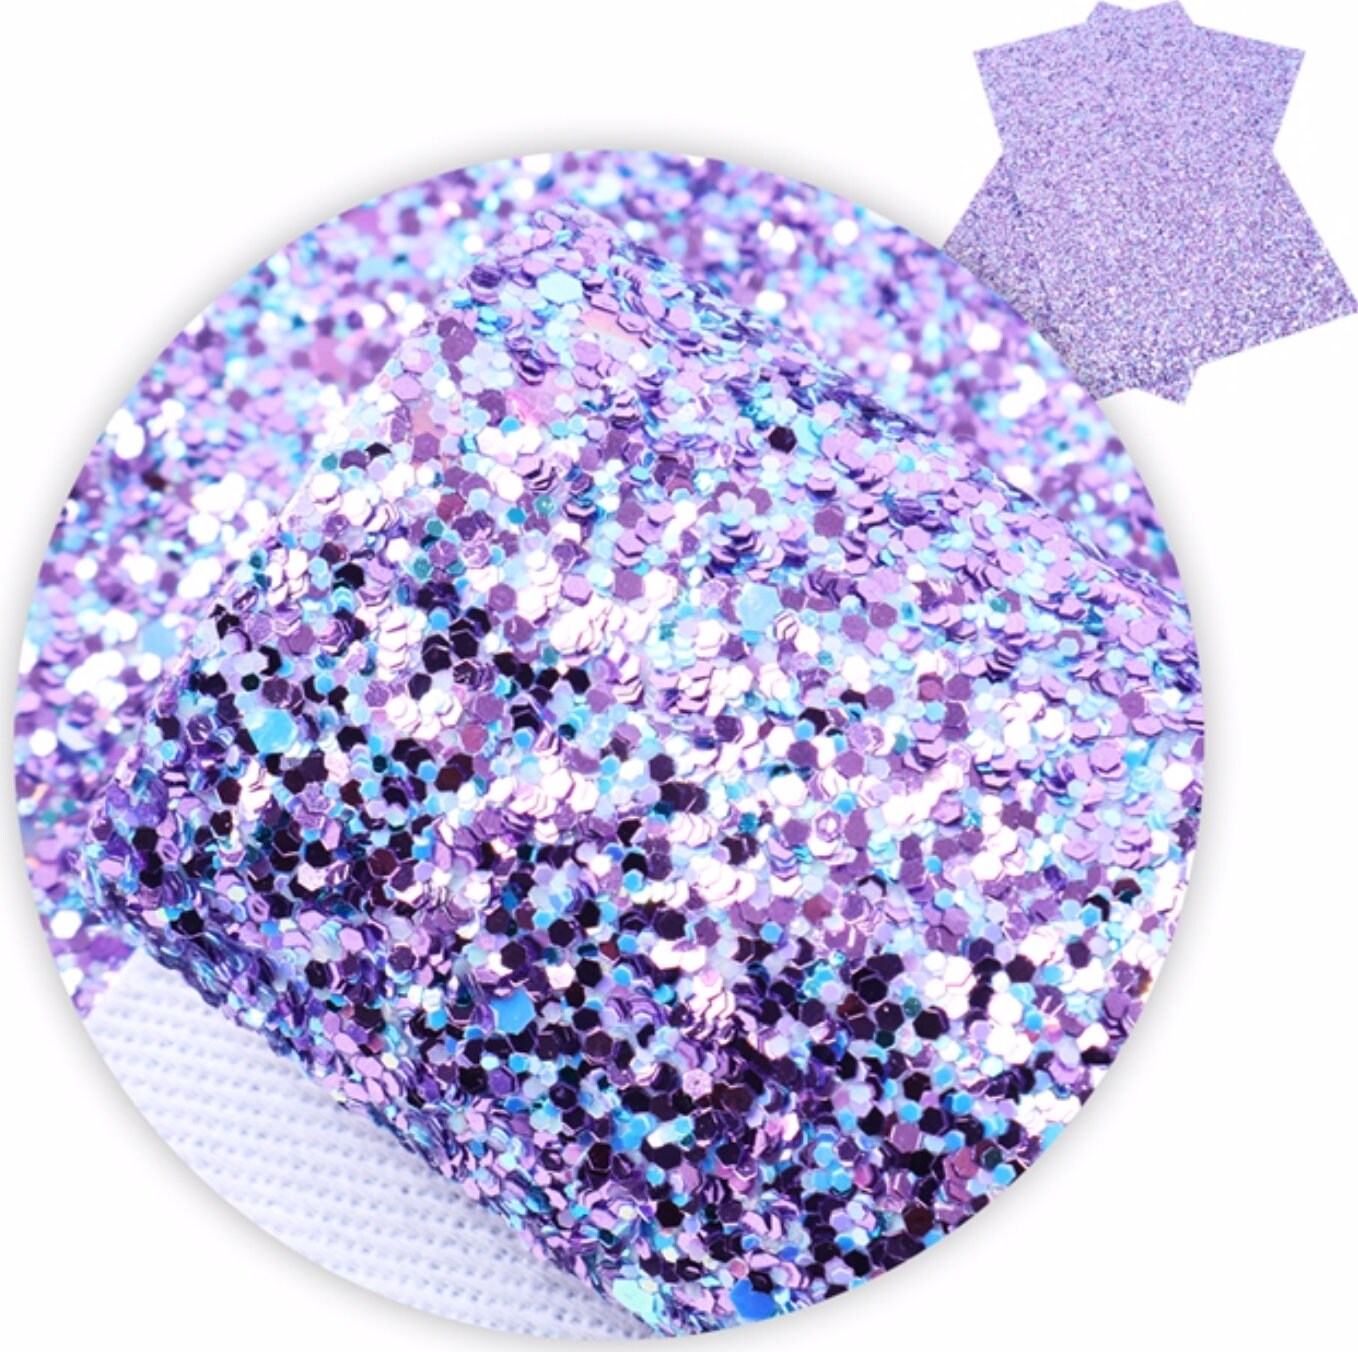 Purple and Blue Chunky Glitter faux leather sheets great for baby bows, ear rings, girl bows, accessories, colorful, shiny TheFabricDude